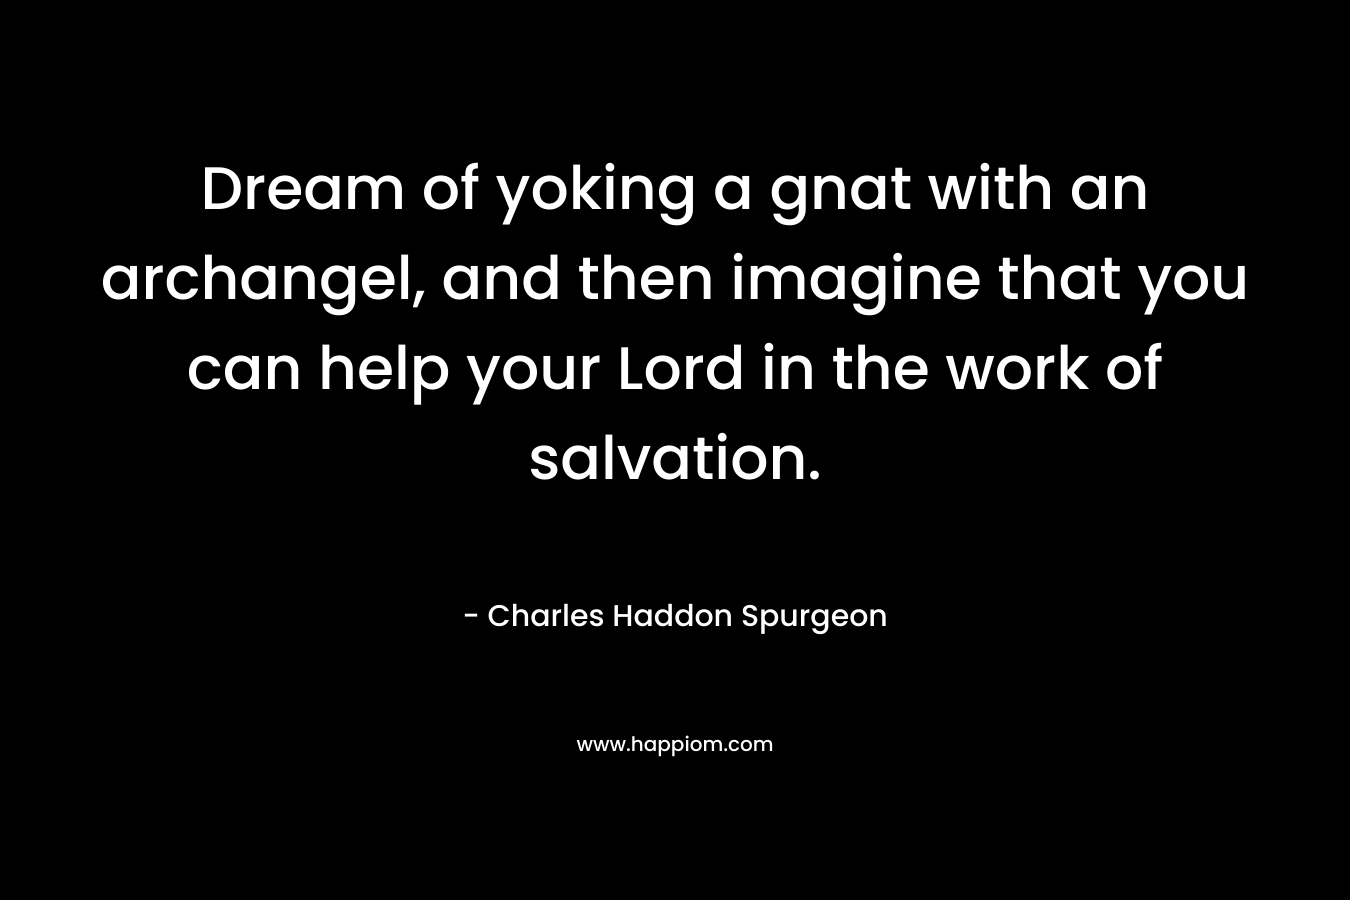 Dream of yoking a gnat with an archangel, and then imagine that you can help your Lord in the work of salvation. – Charles Haddon Spurgeon